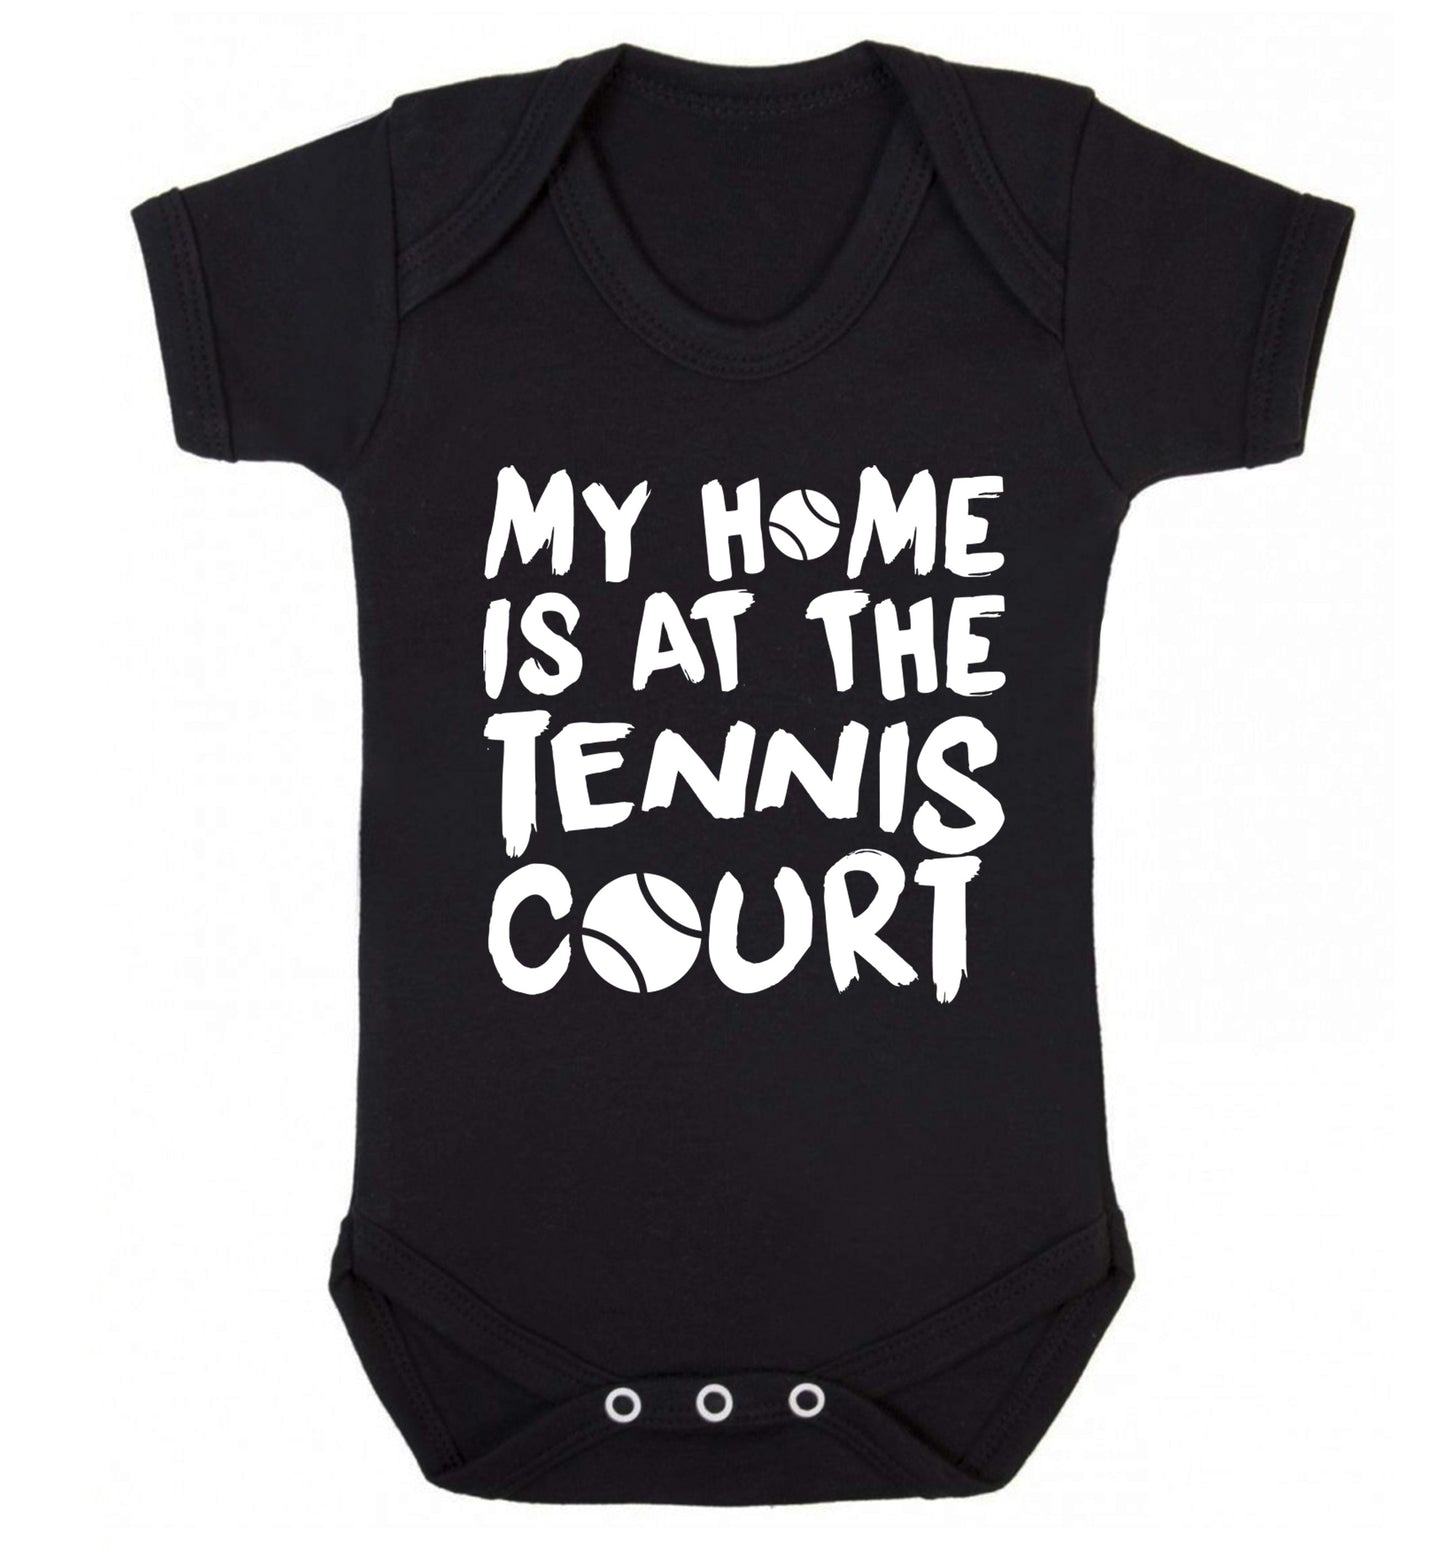 My home is at the tennis court Baby Vest black 18-24 months